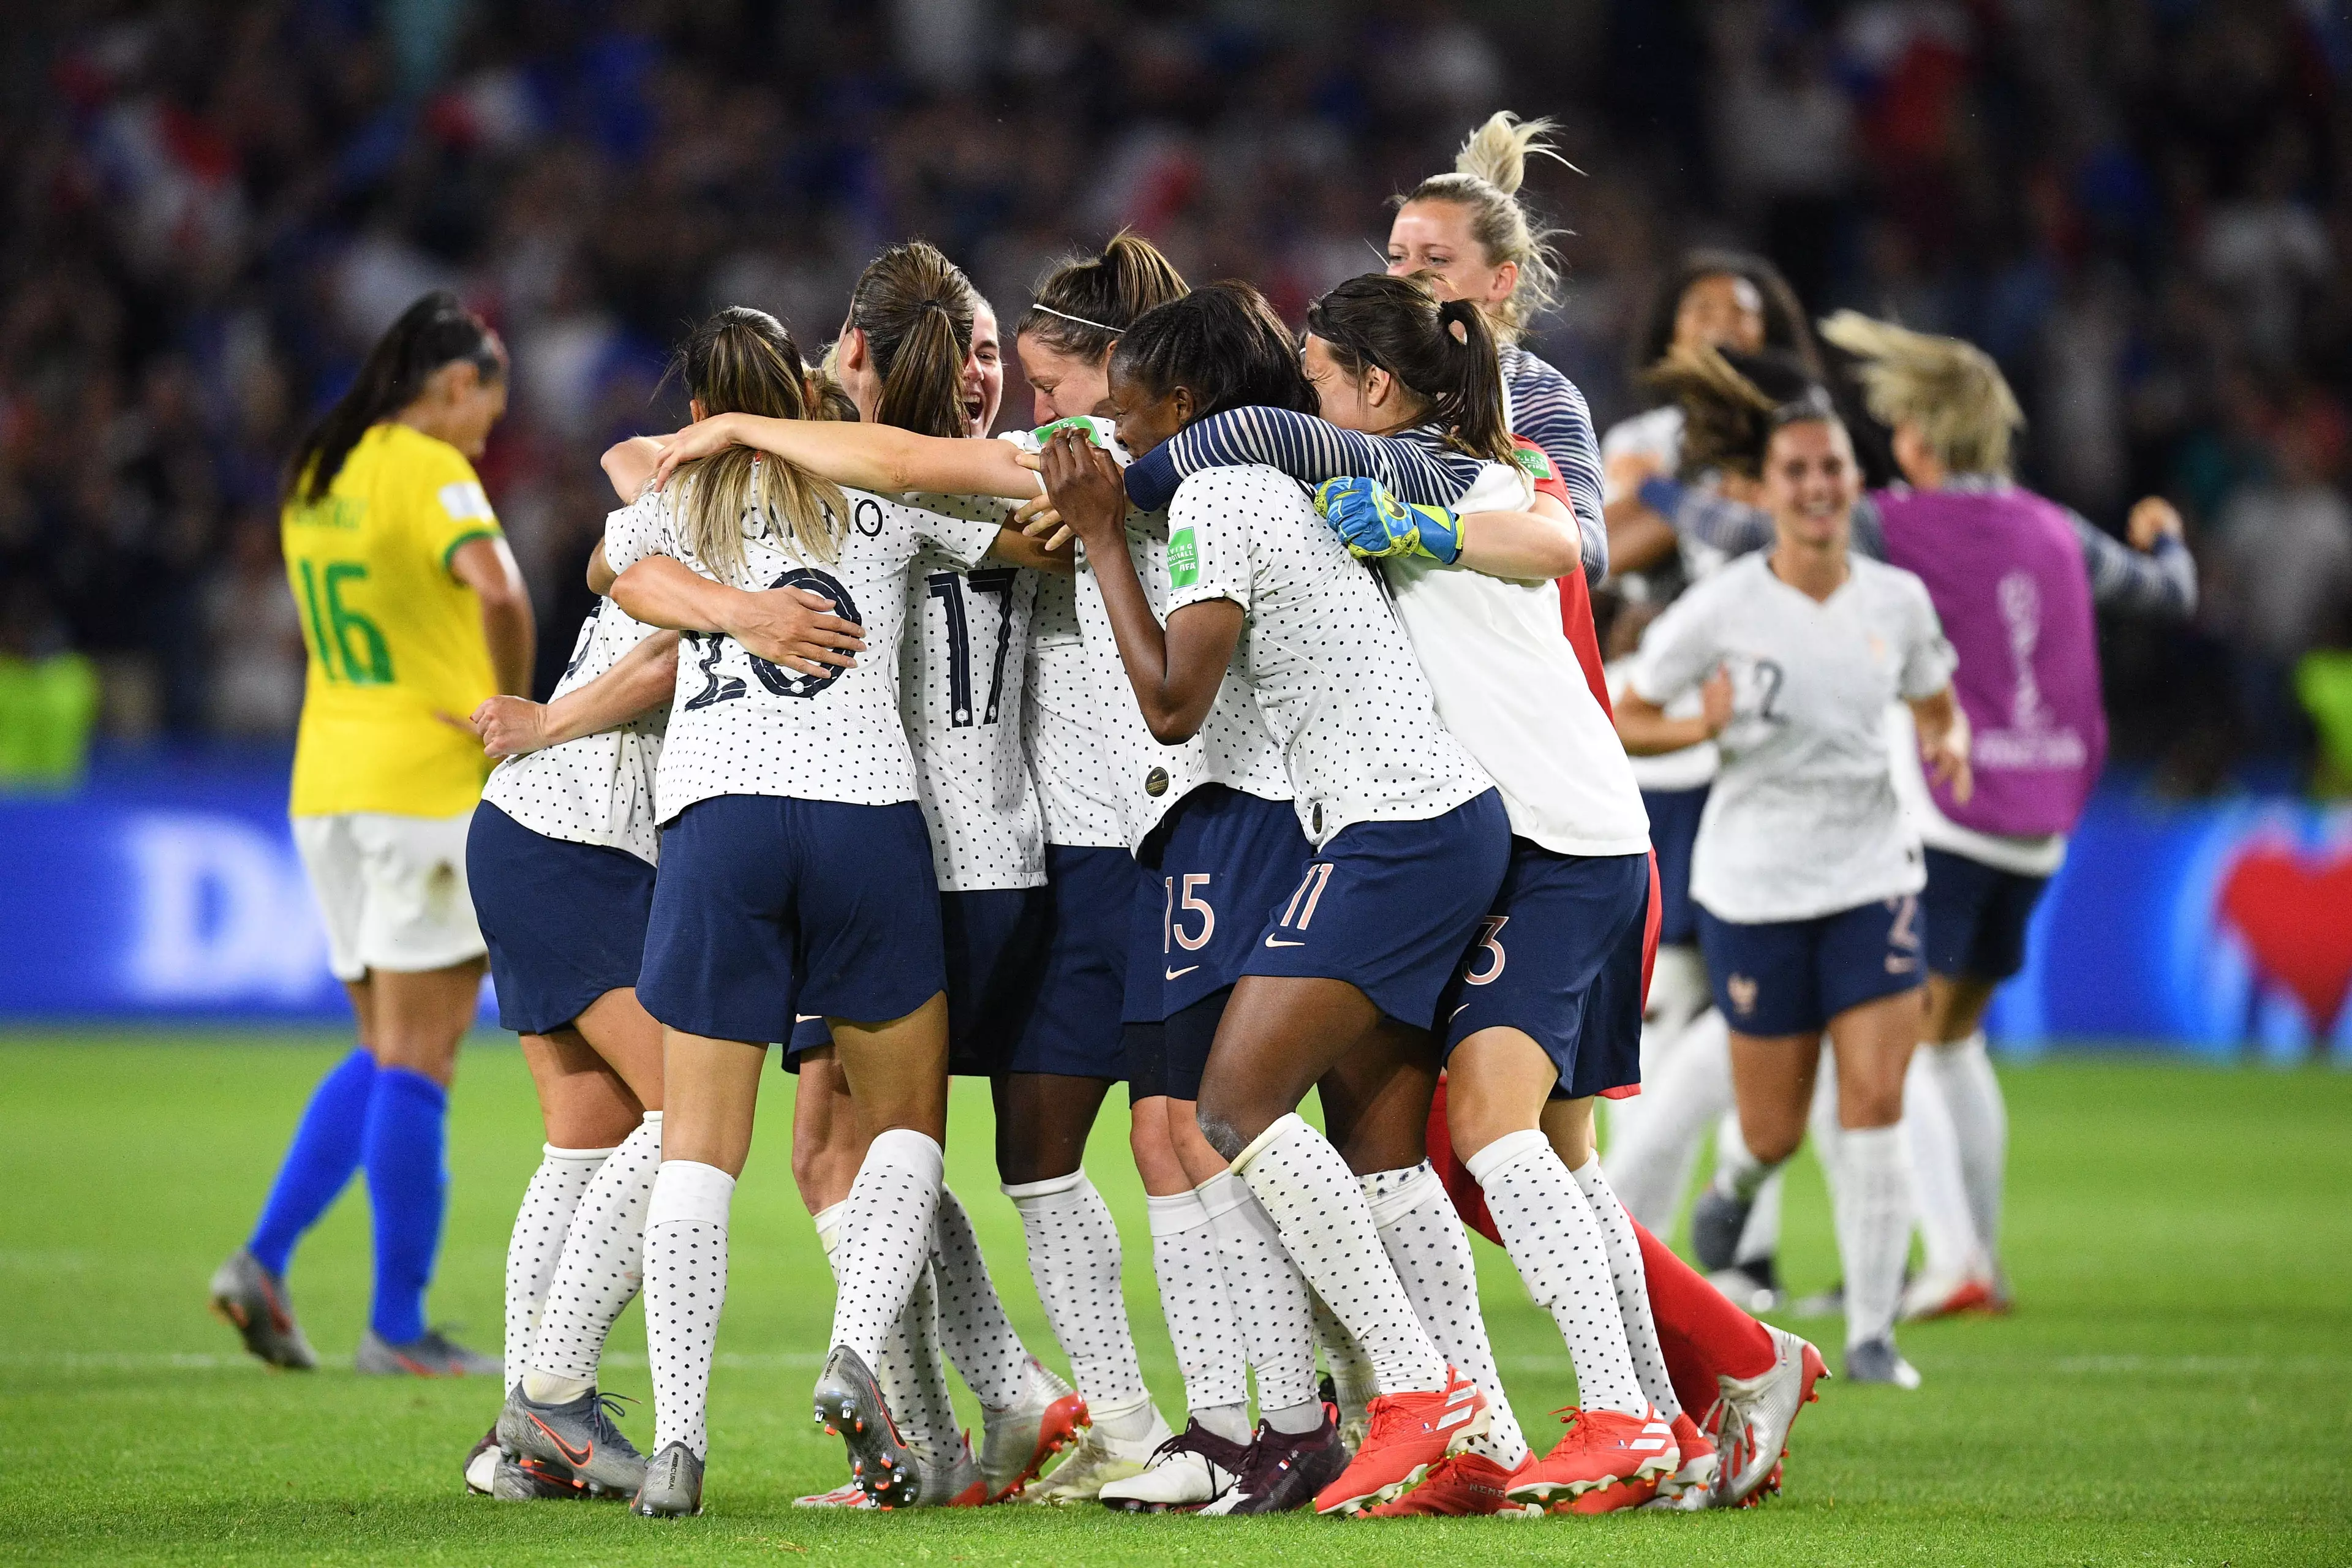 France celebrate going through to the quarter finals. Image: PA Images